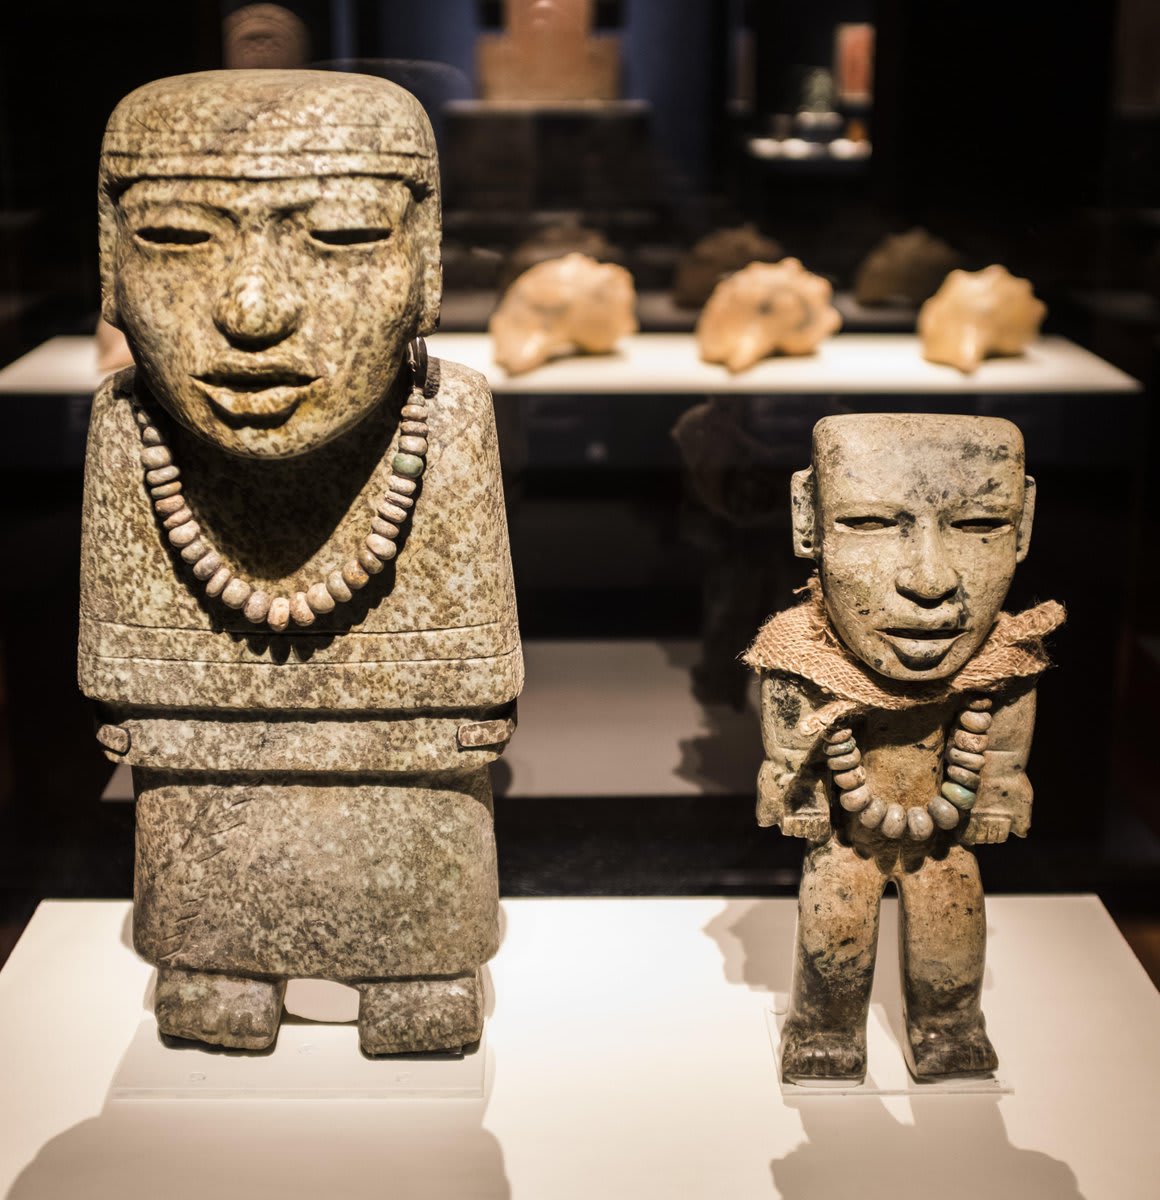 Tomorrow students ages 13–17 can enjoy free admission to TeotihuacanNow as part of our Teo Teen Day. Learn more here: